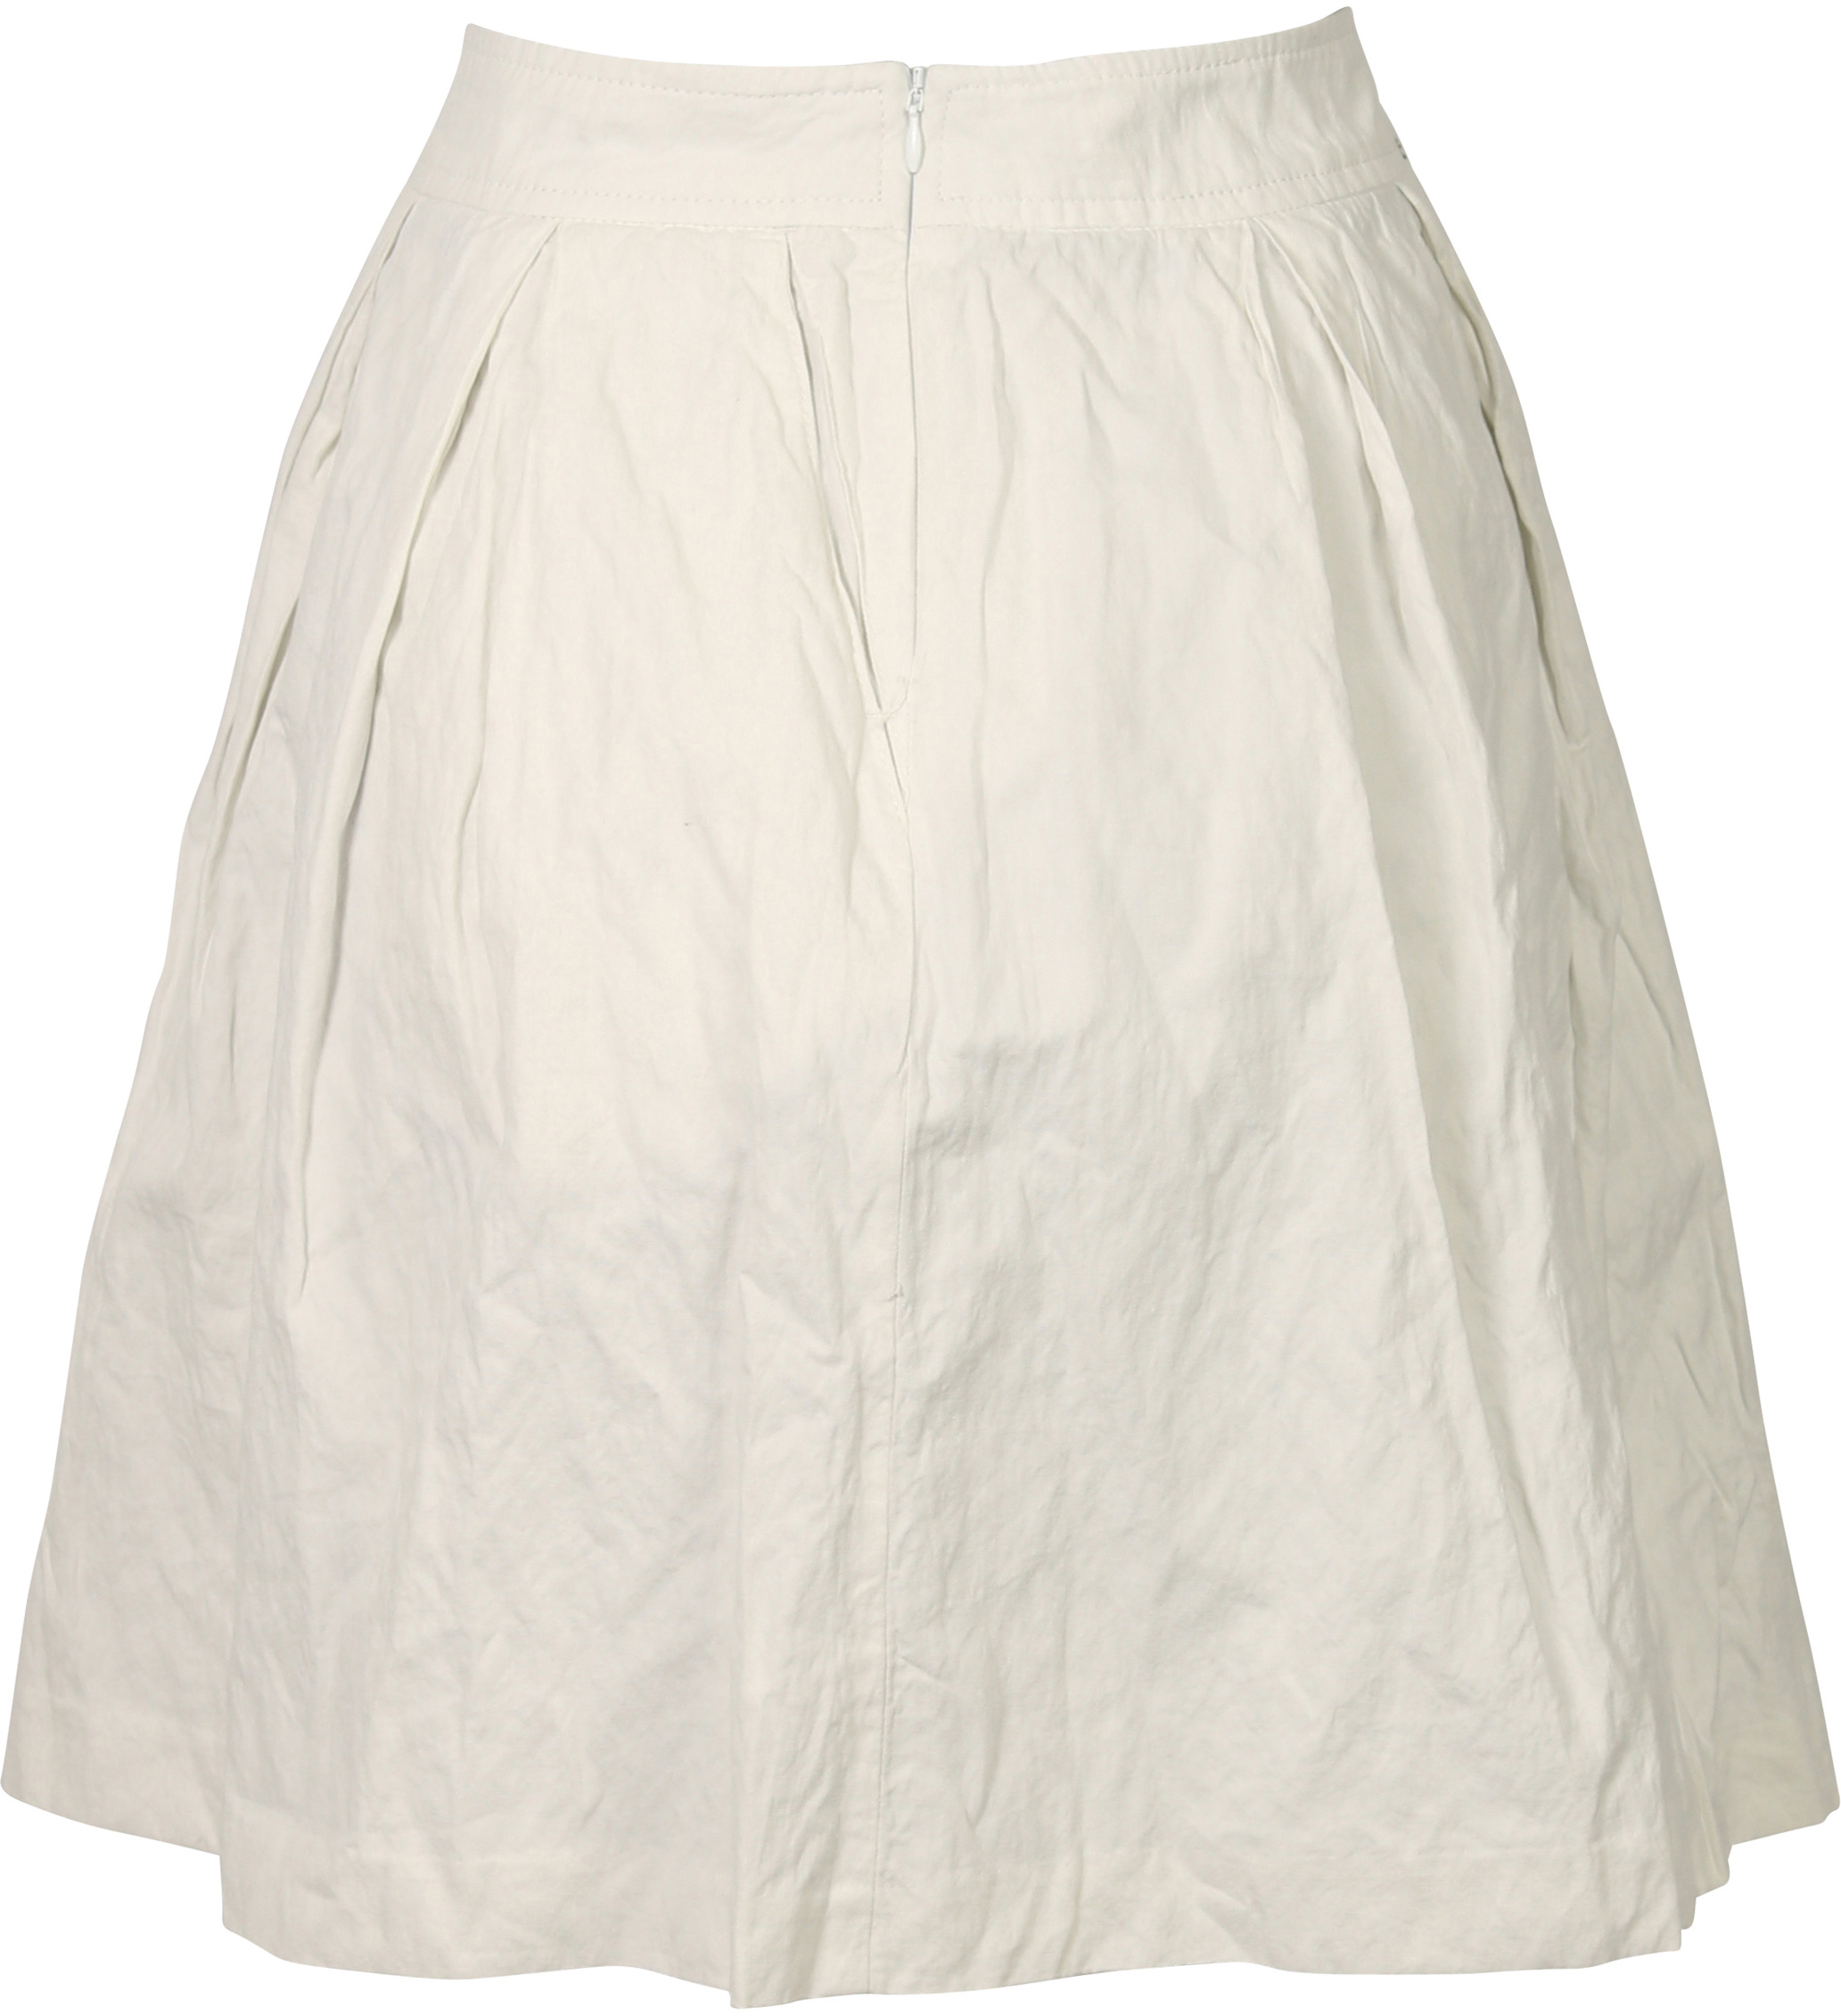 Hannes Roether Skirt Offwhite XS